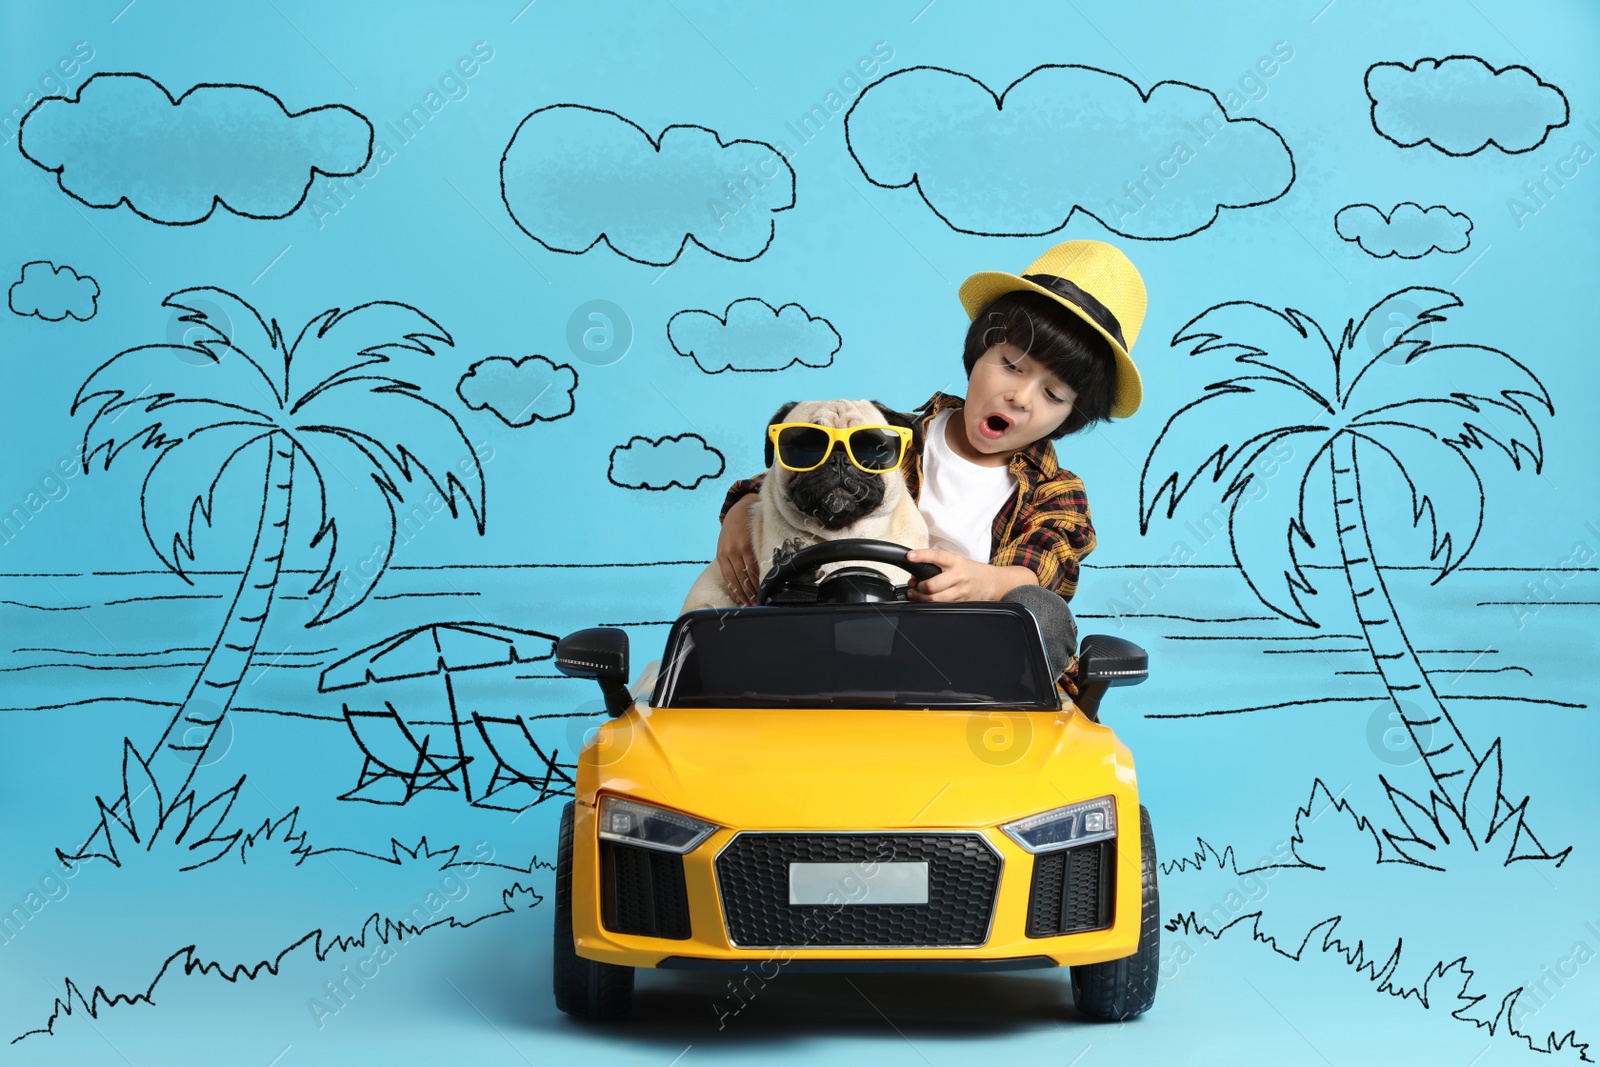 Image of Cute little boy with his dog in toy car and drawing of tropical resort on light blue background